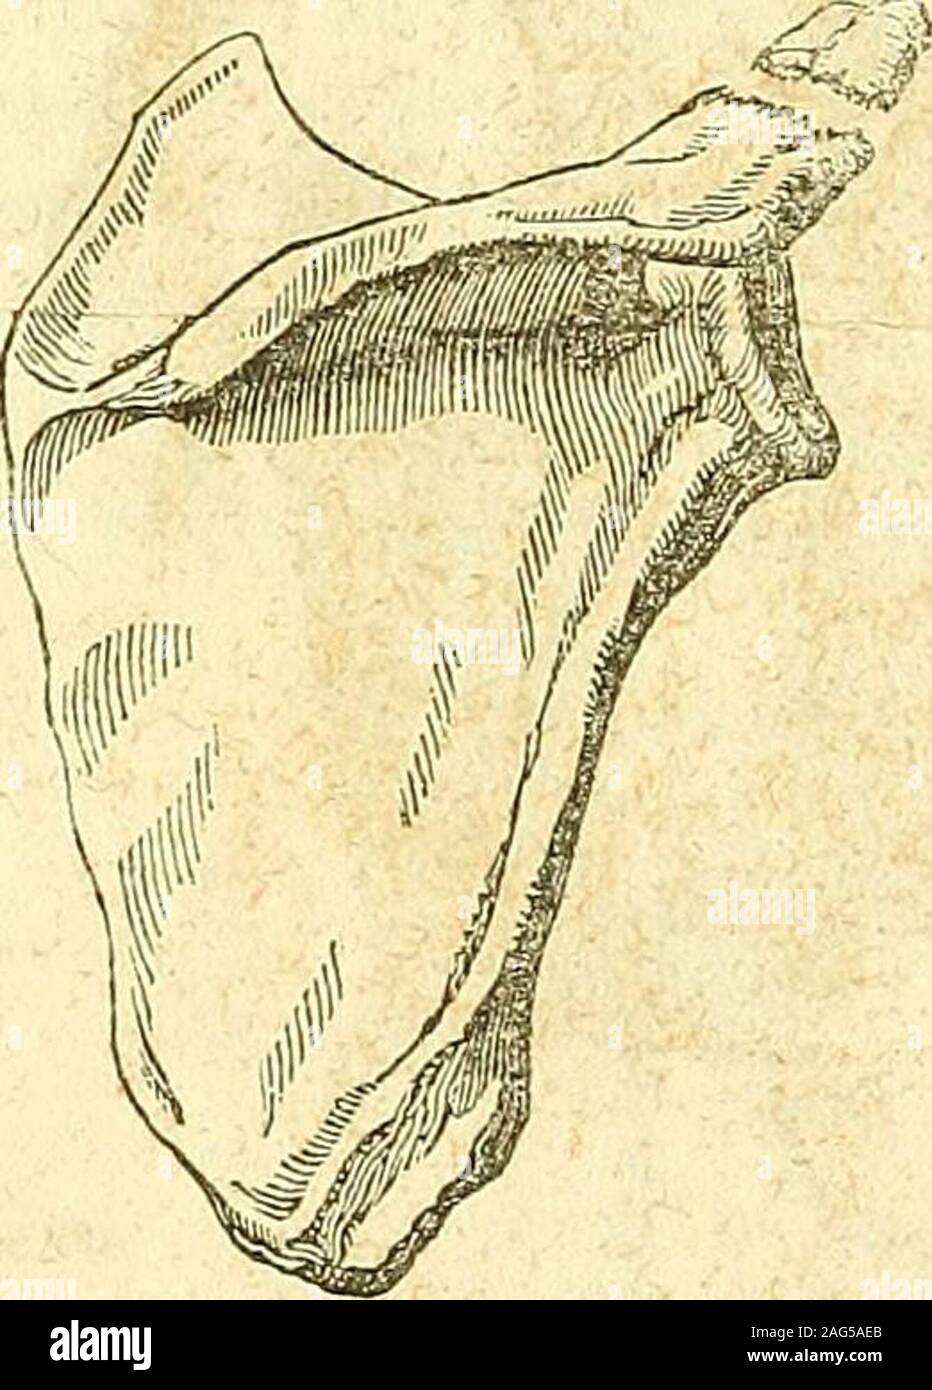 . The principles and practice of modern surgery. thefragment is restored to its place. This is alsoa rare accident; and Mr. Fergusson believesthat in some of the supposed cases of ligamentous union, the detachedportion was never united by ossification to the rest of the bone frombirth. Trea^men^.—The same bandages, &c., are to be applied as for fractureof the clavicle; but great care must be taken to raise the elbow thoroughly,so that the head of the humerus may be lifted up against the acromion,and keep it in its place. Moreover, no pad must be placed in the axilla;otherwise the broken part w Stock Photo